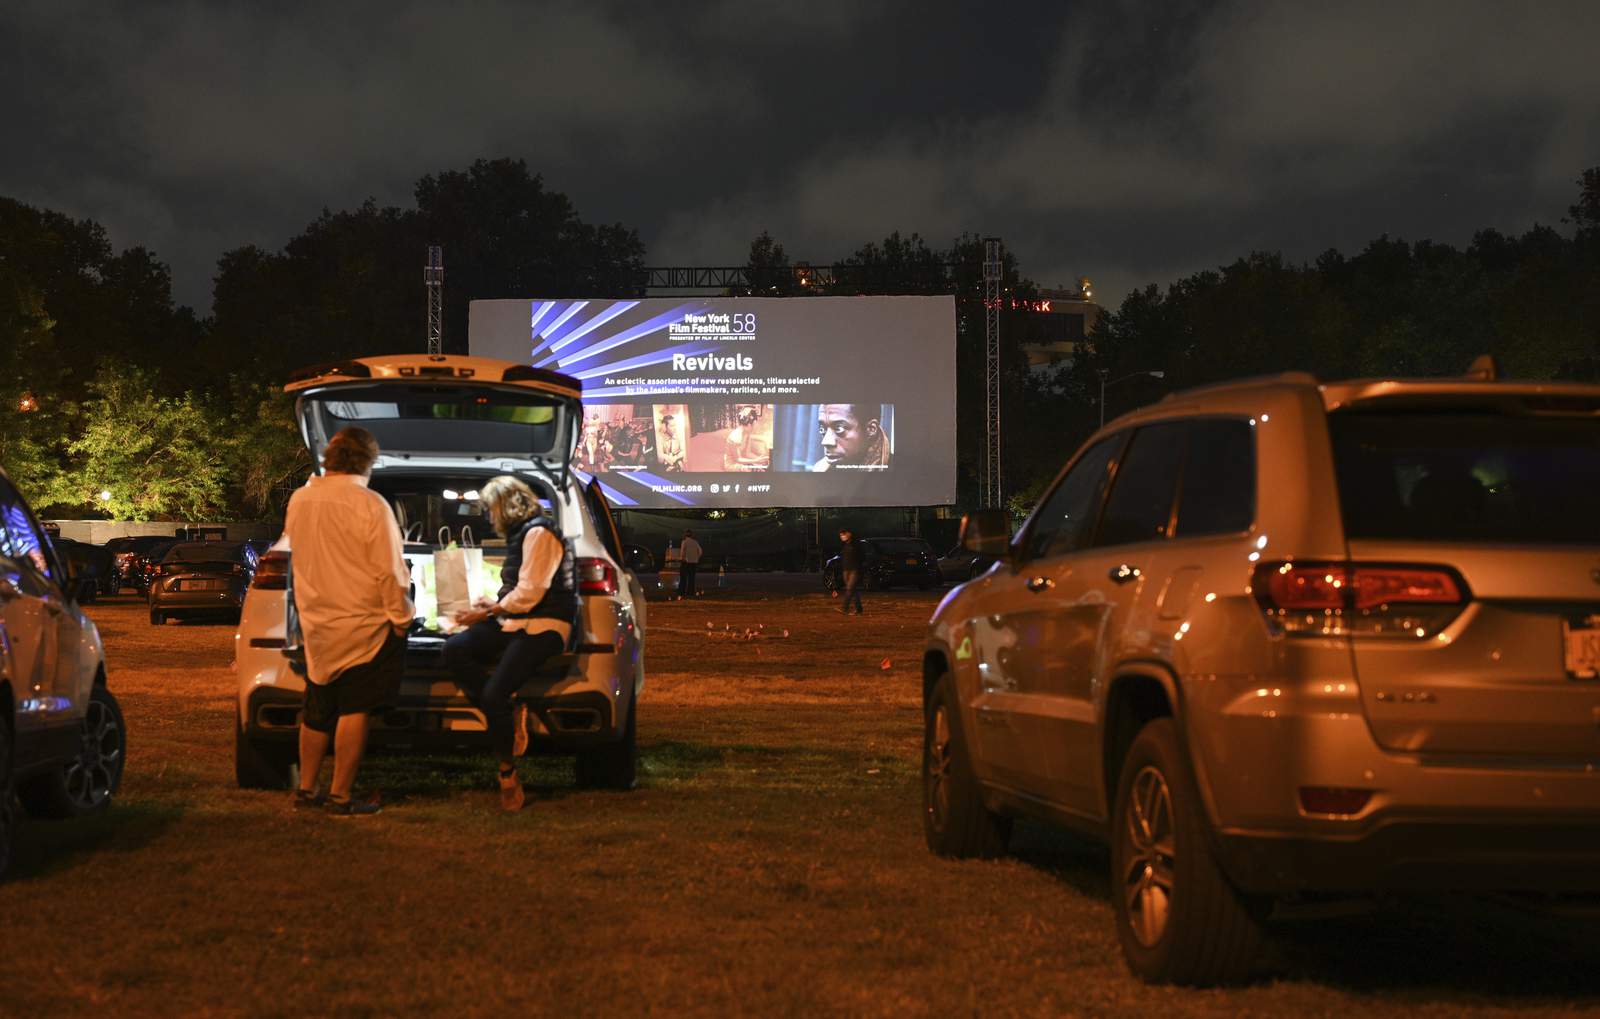 Sunset falls on a historic season for the drive-in